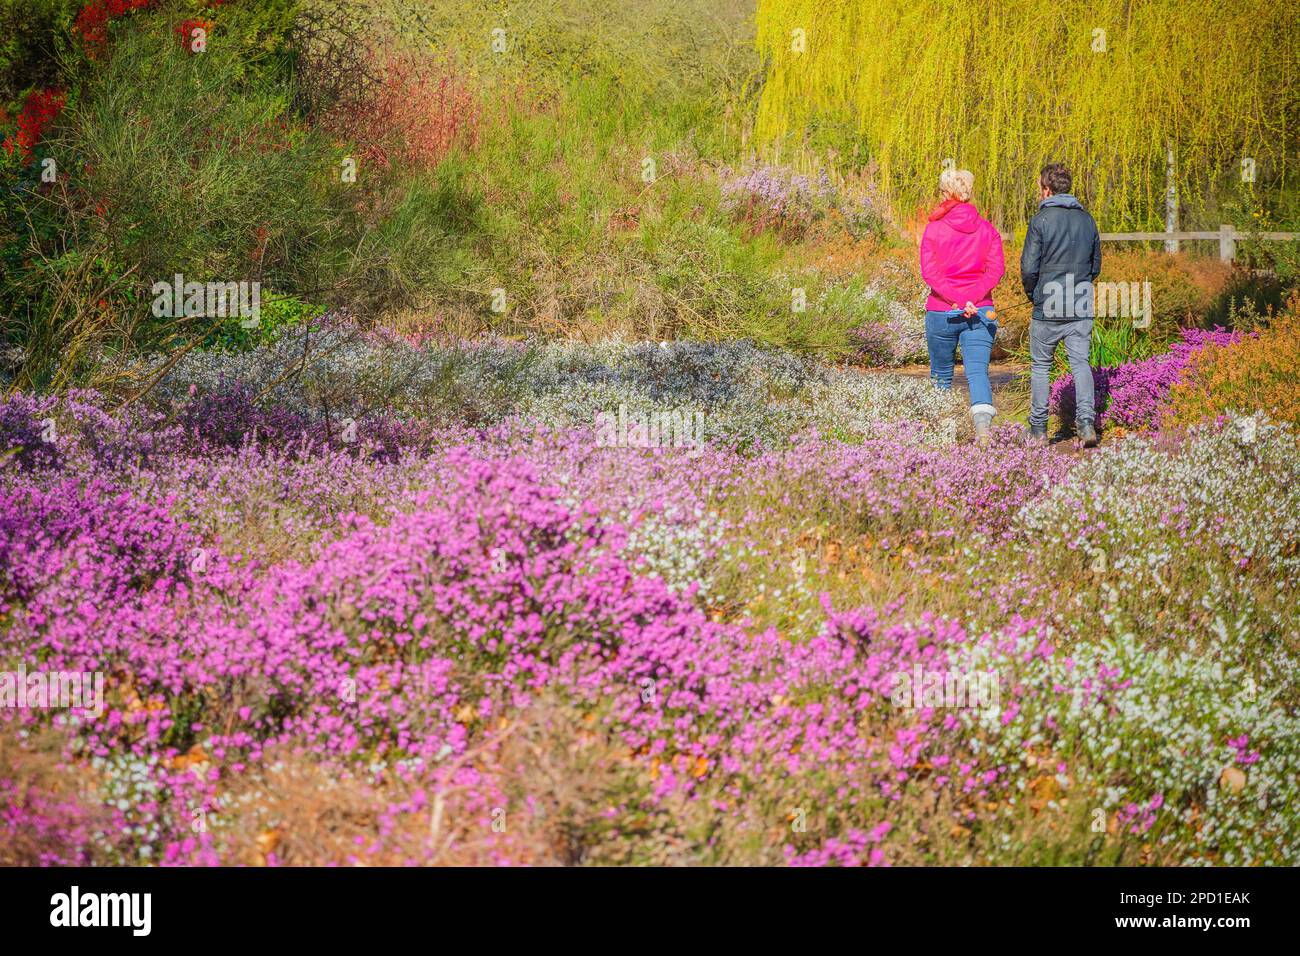 London, UK - April 5, 2018 - Tourists walking through blooming heather flowers in Isabella Plantation, a woodland garden in Richmond Park Stock Photo